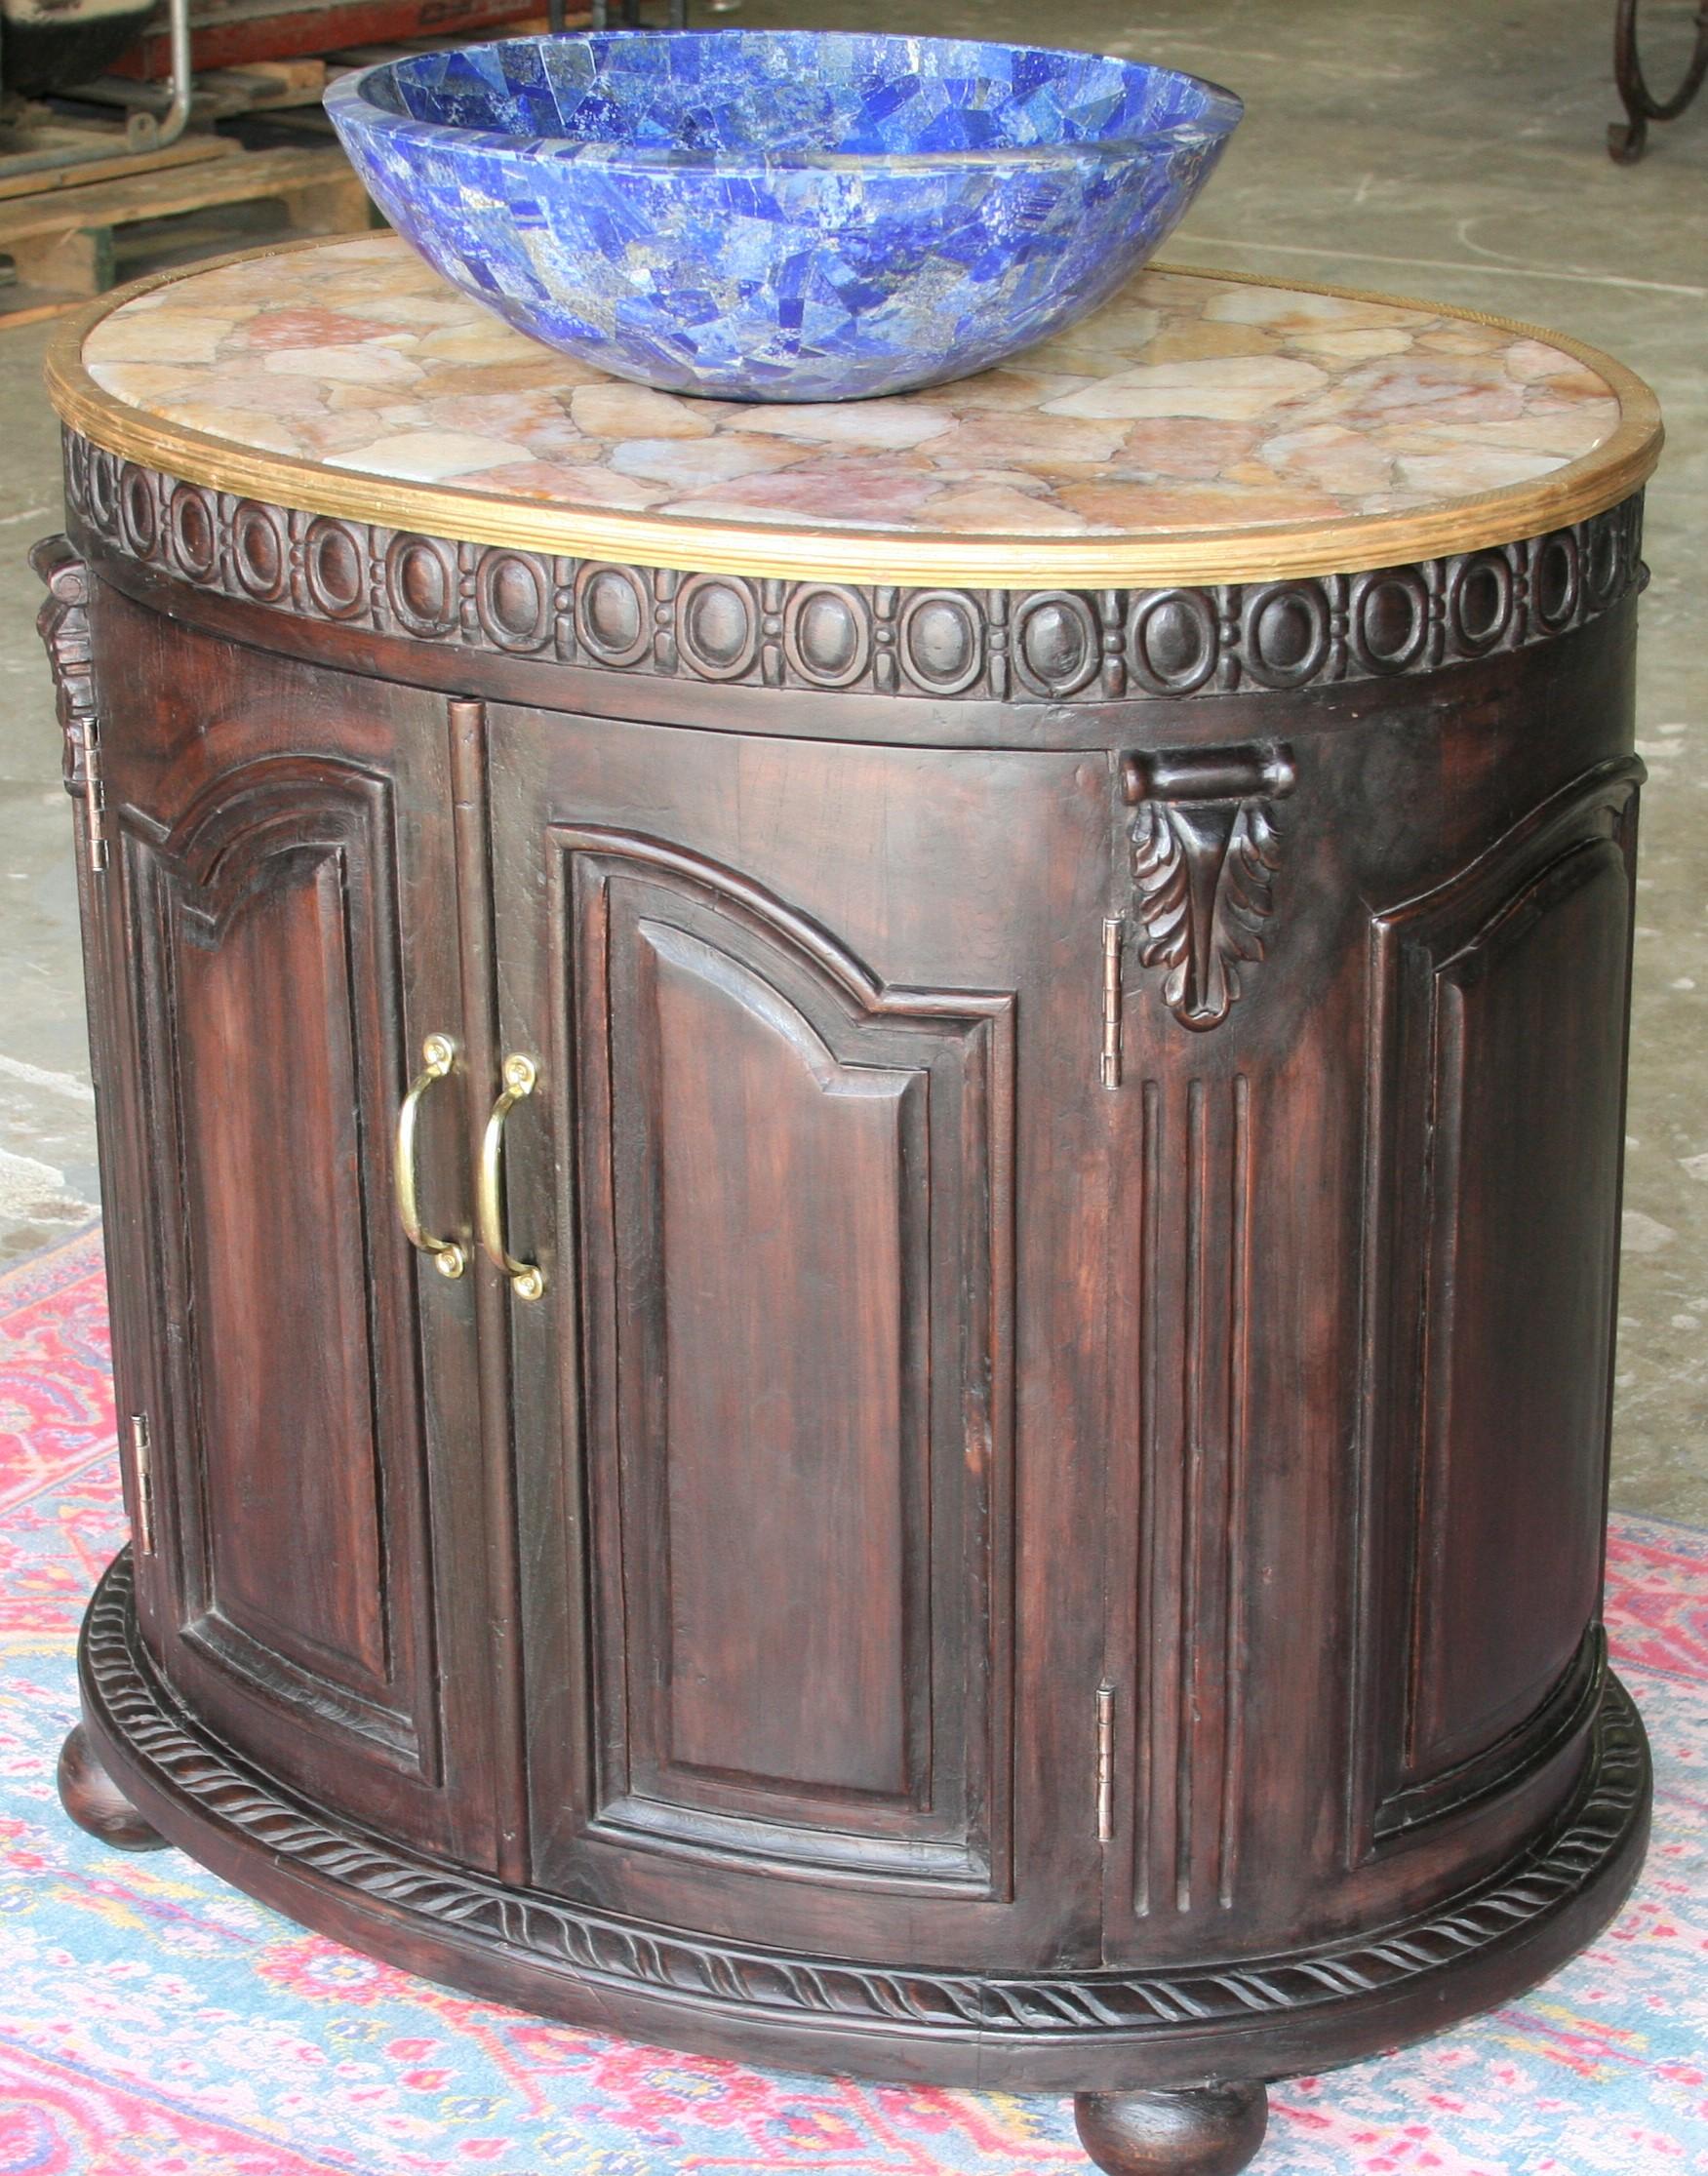 This extraordinary wedding gift was custom handcrafted and given as part of the gifts by the bride's family to the groom.
The oval shaped vanity is made of hand carved teak wood with inside painted in silver tone. It is supported on ball feet. The